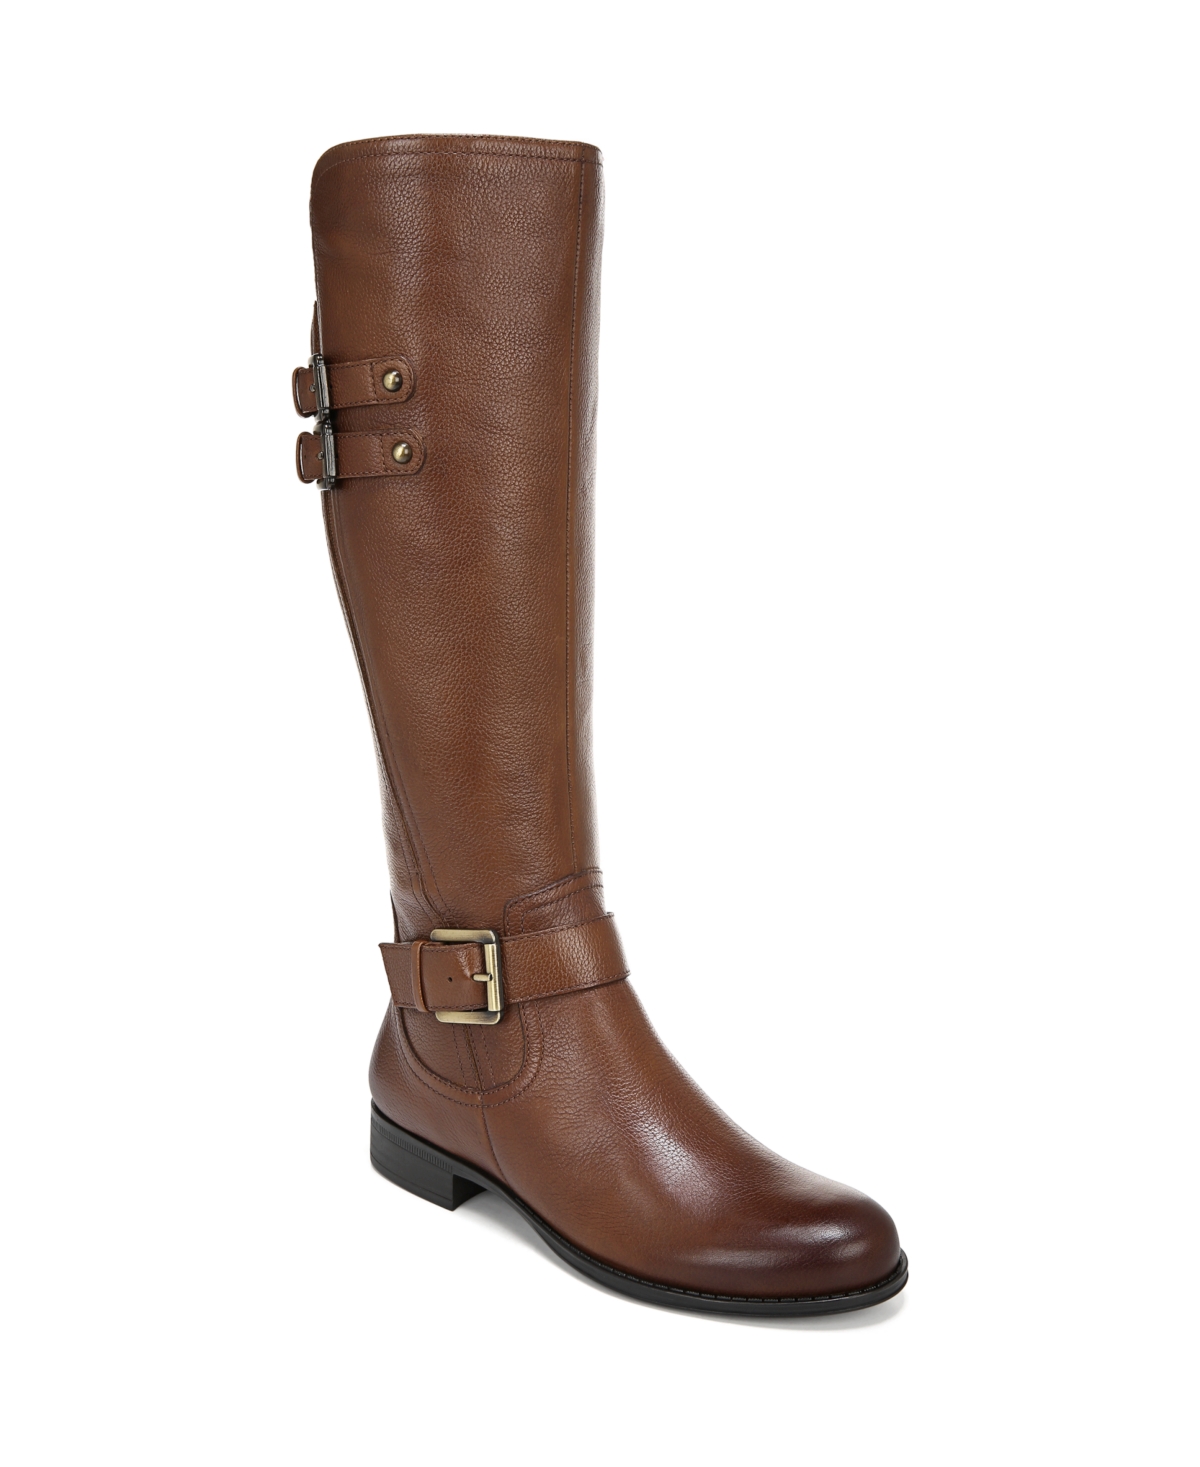 Jessie Wide Calf Riding Boots - Cinnamon Leather